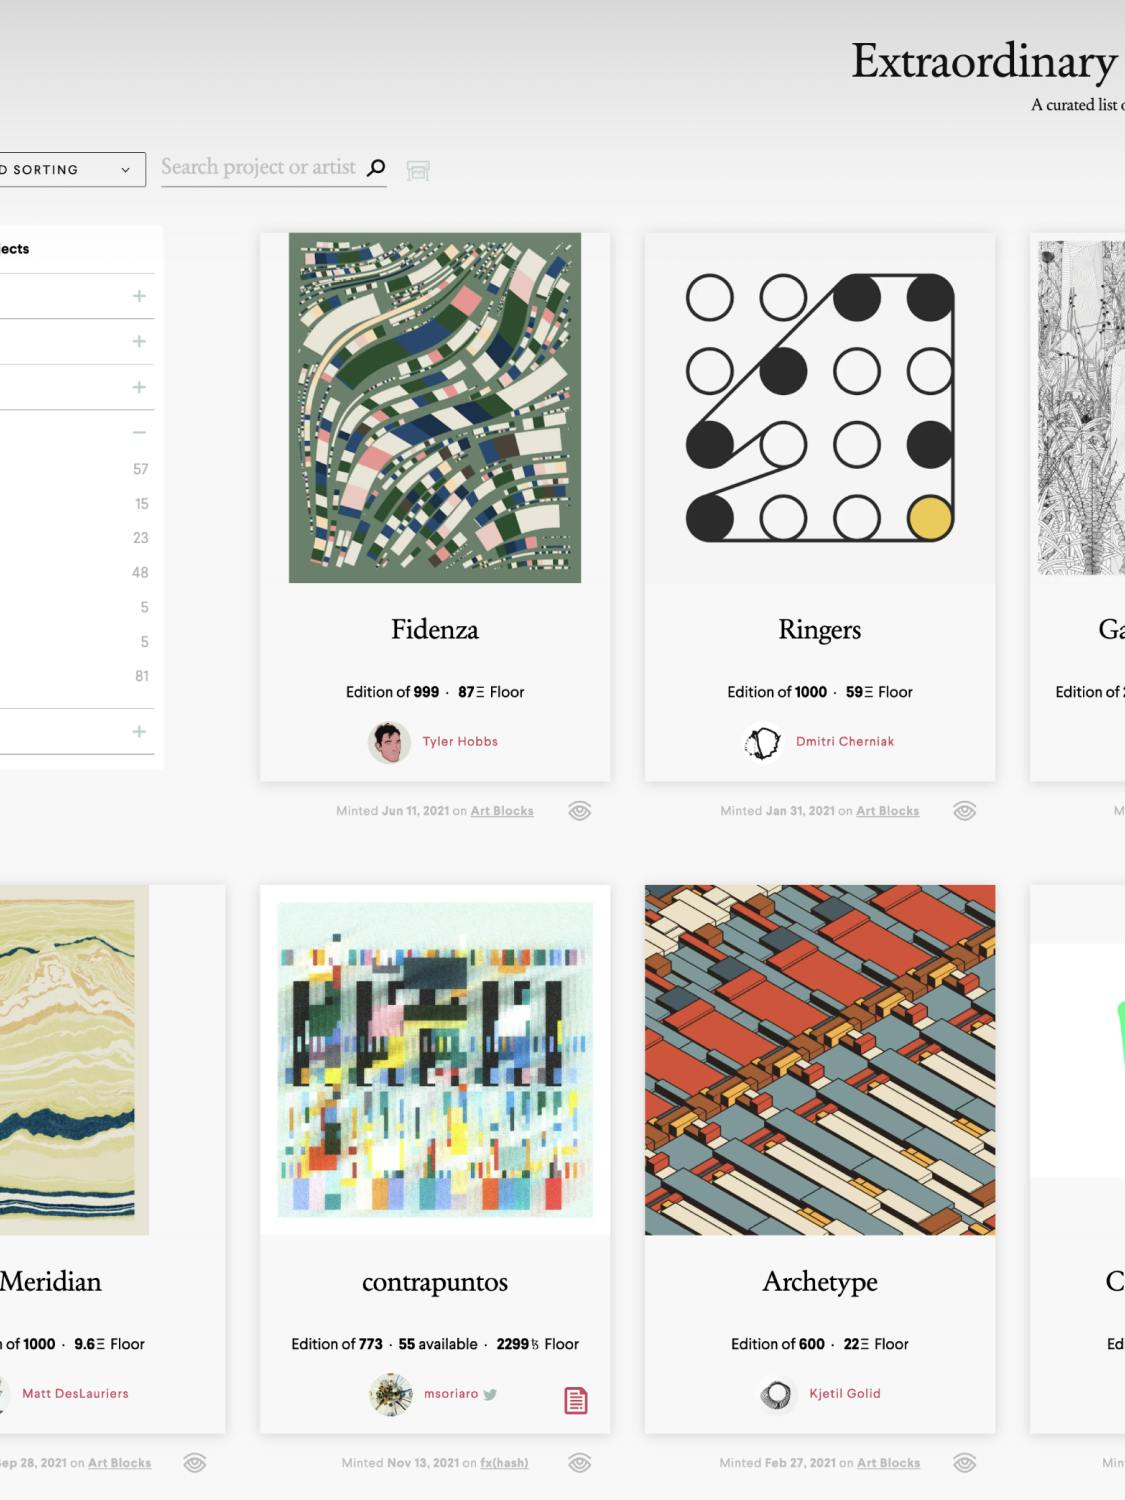 Explore our curation of iconic
long-form generative artworks.